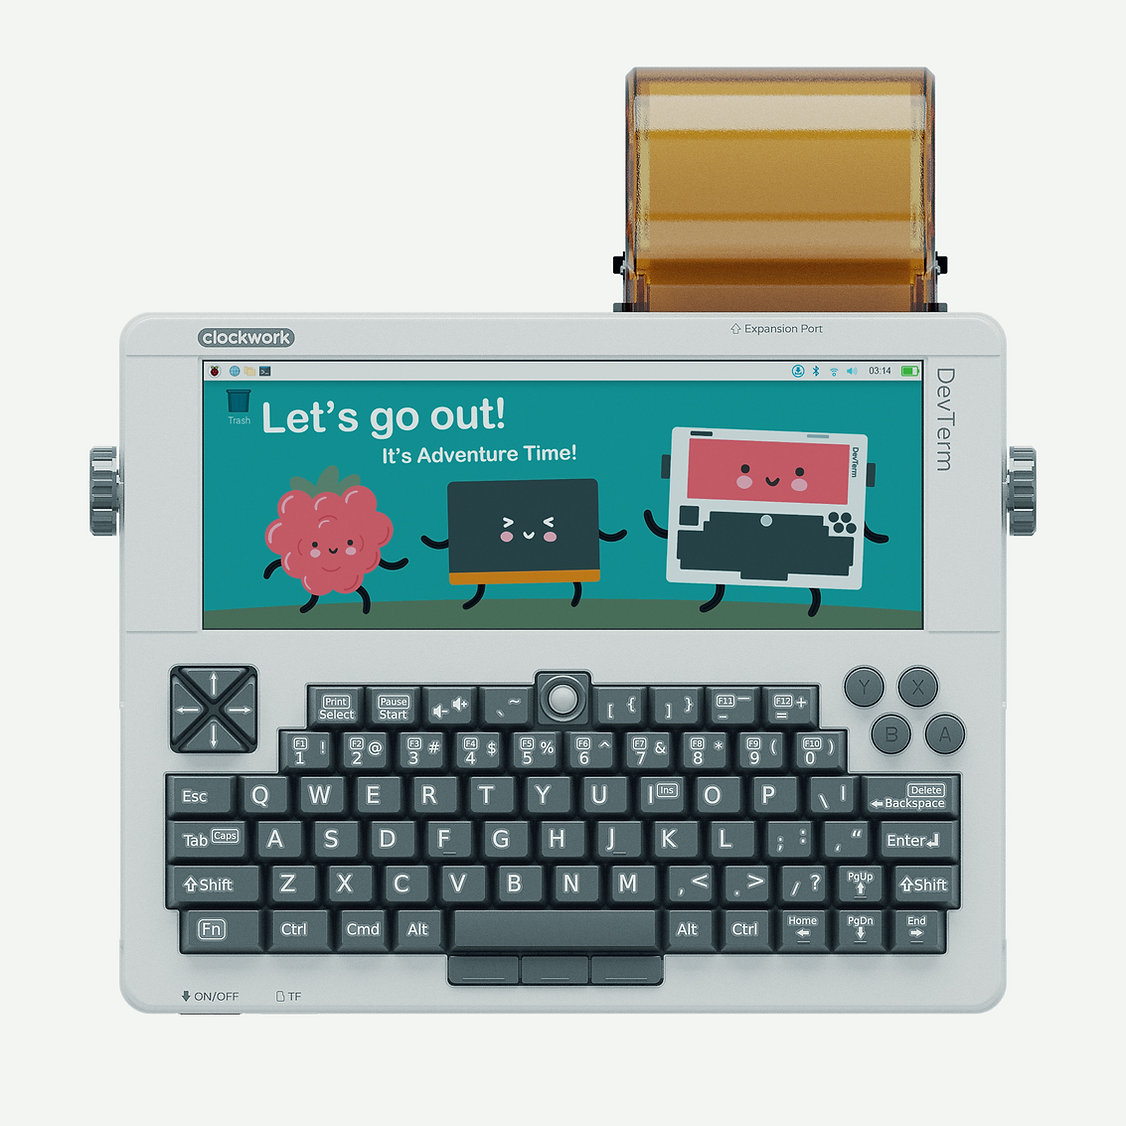 Cute, flat, gray, portable computer. It looks a lot like an old calculator: retro-futuristic. The screen is relatively small and ultra-wide, featuring a cute illustration.